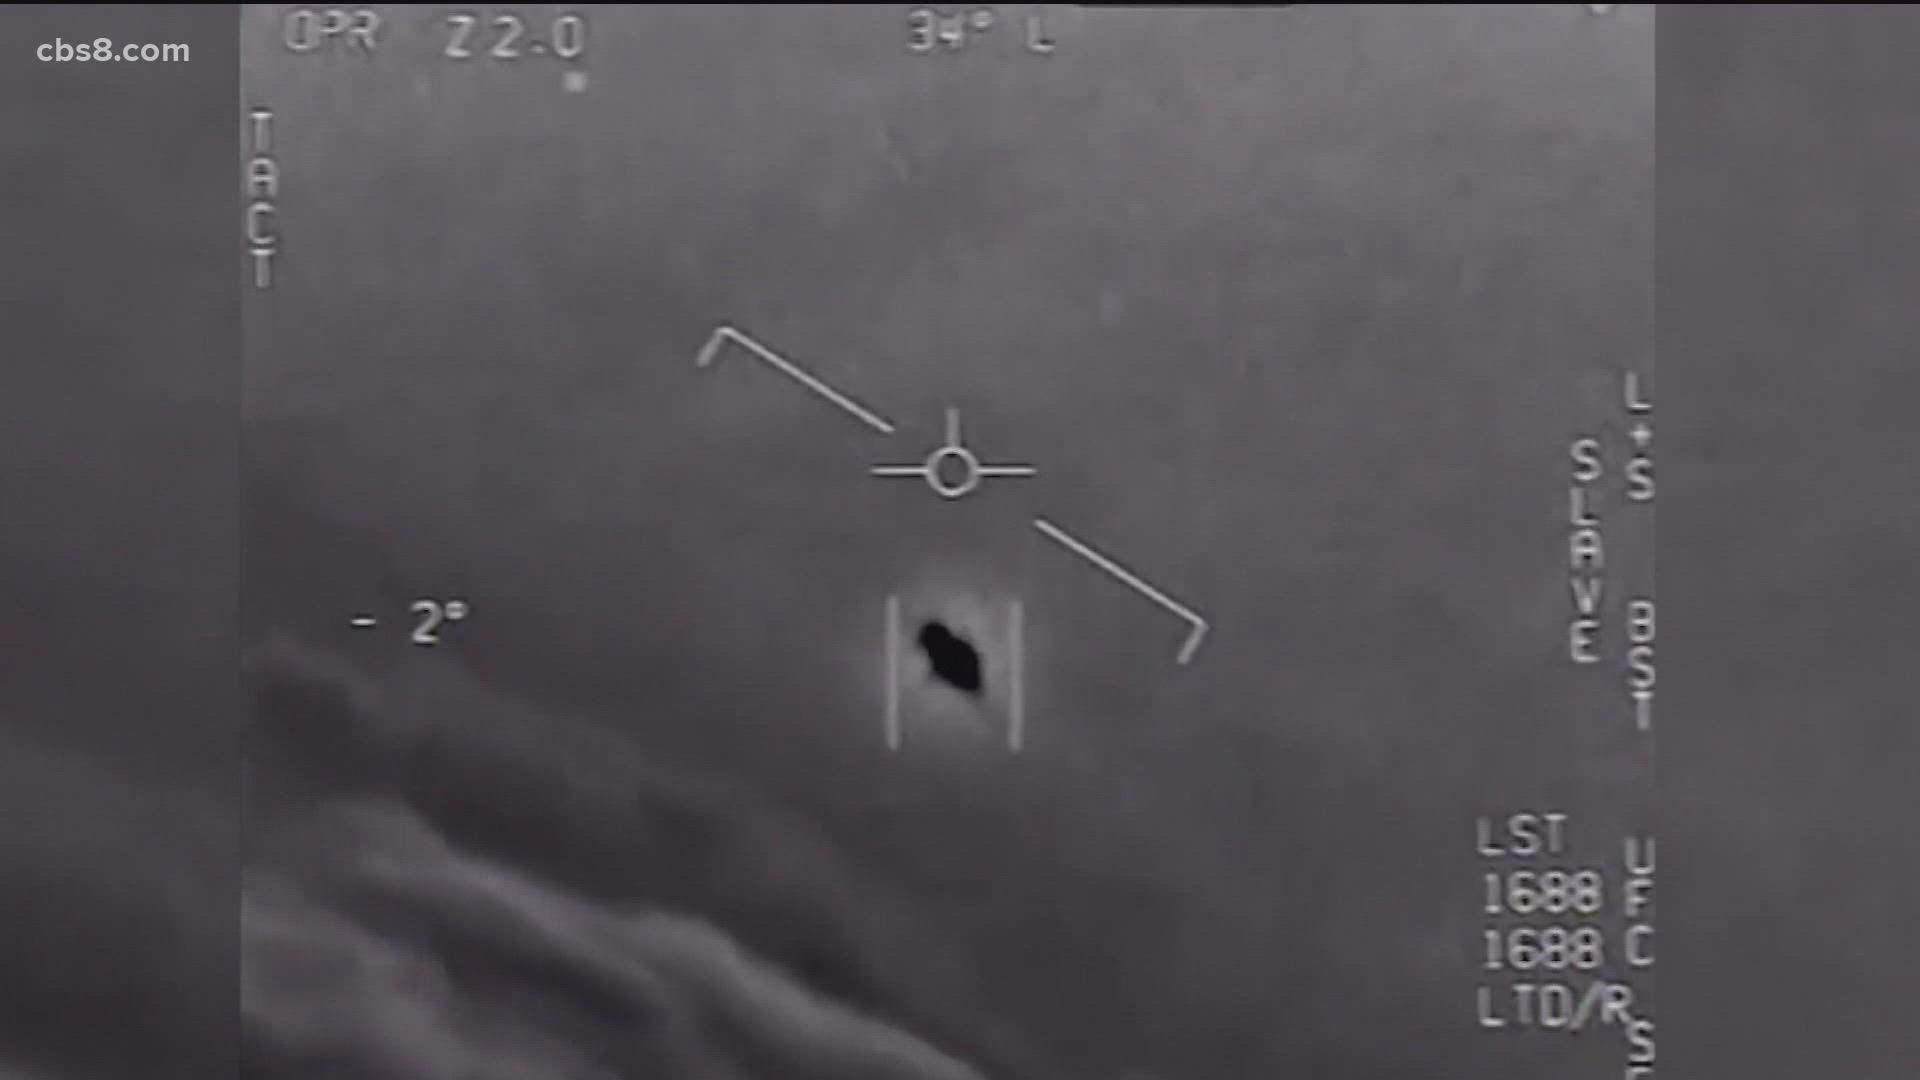 UFO sightings: Updates from the congressional hearing